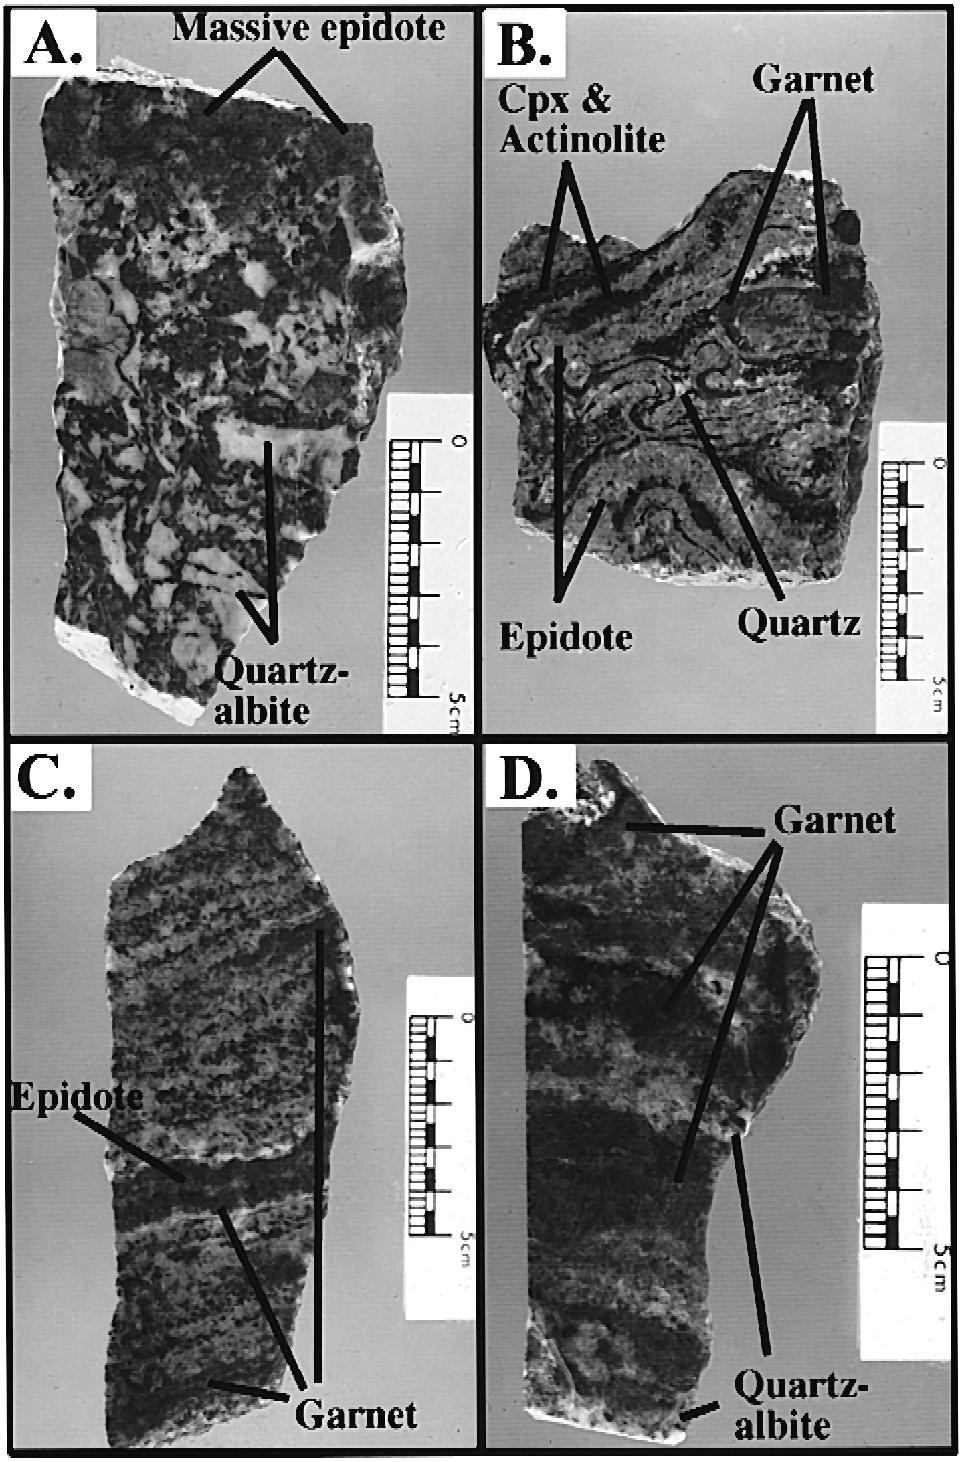 42 ( ) A.J.R. Kent et al.rlithos 54 2000 33 62 Fig. 6. Handspecimen photos of samples from garnet epidote alteration zones. Ž A. Brecciated and altered calc-silicate from Boolcoomatta Ž sample BC-8.